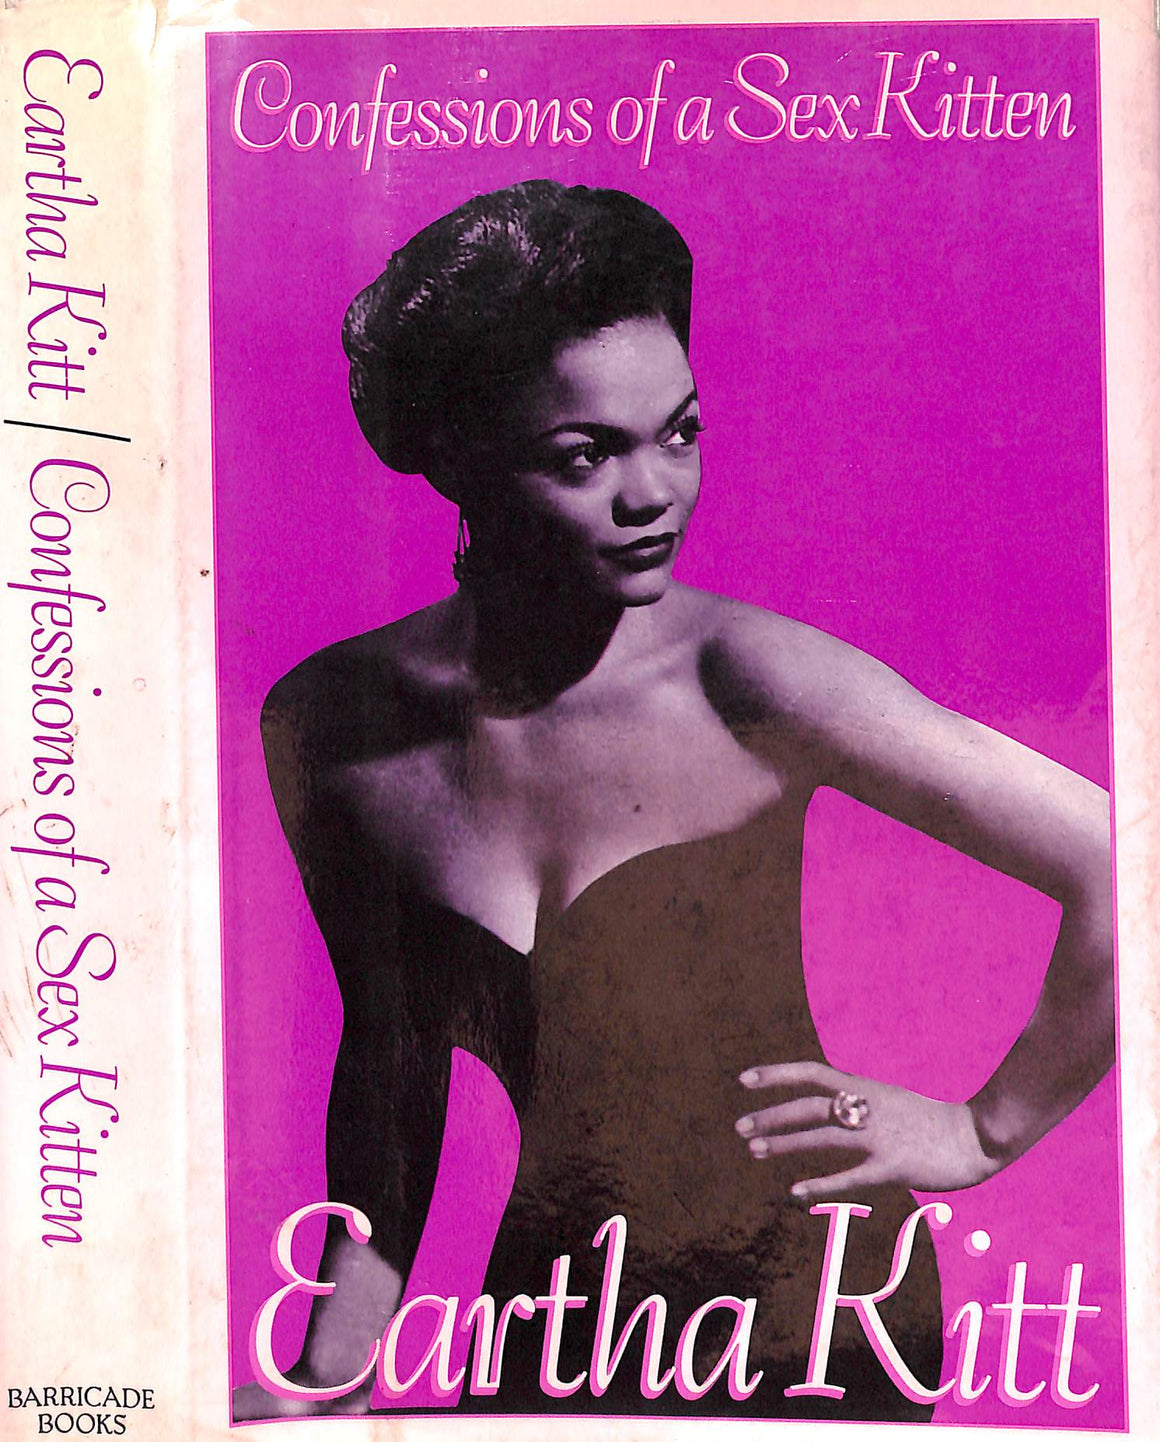 "Confessions Of A Sex Kitten" 1989 KITT, Eartha (SIGNED)